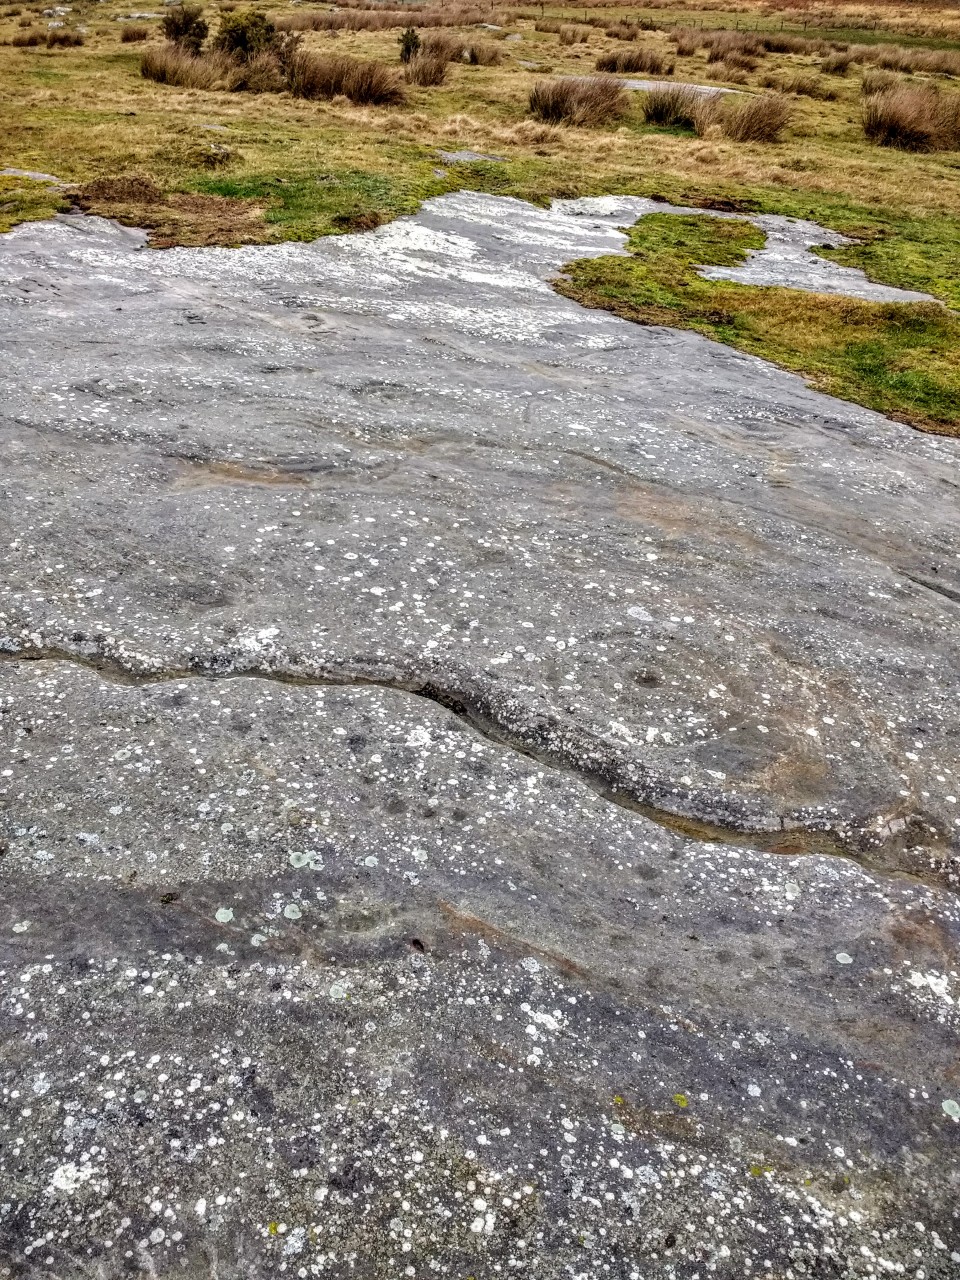 Chatton (Cup and Ring Marks / Rock Art) by spencer